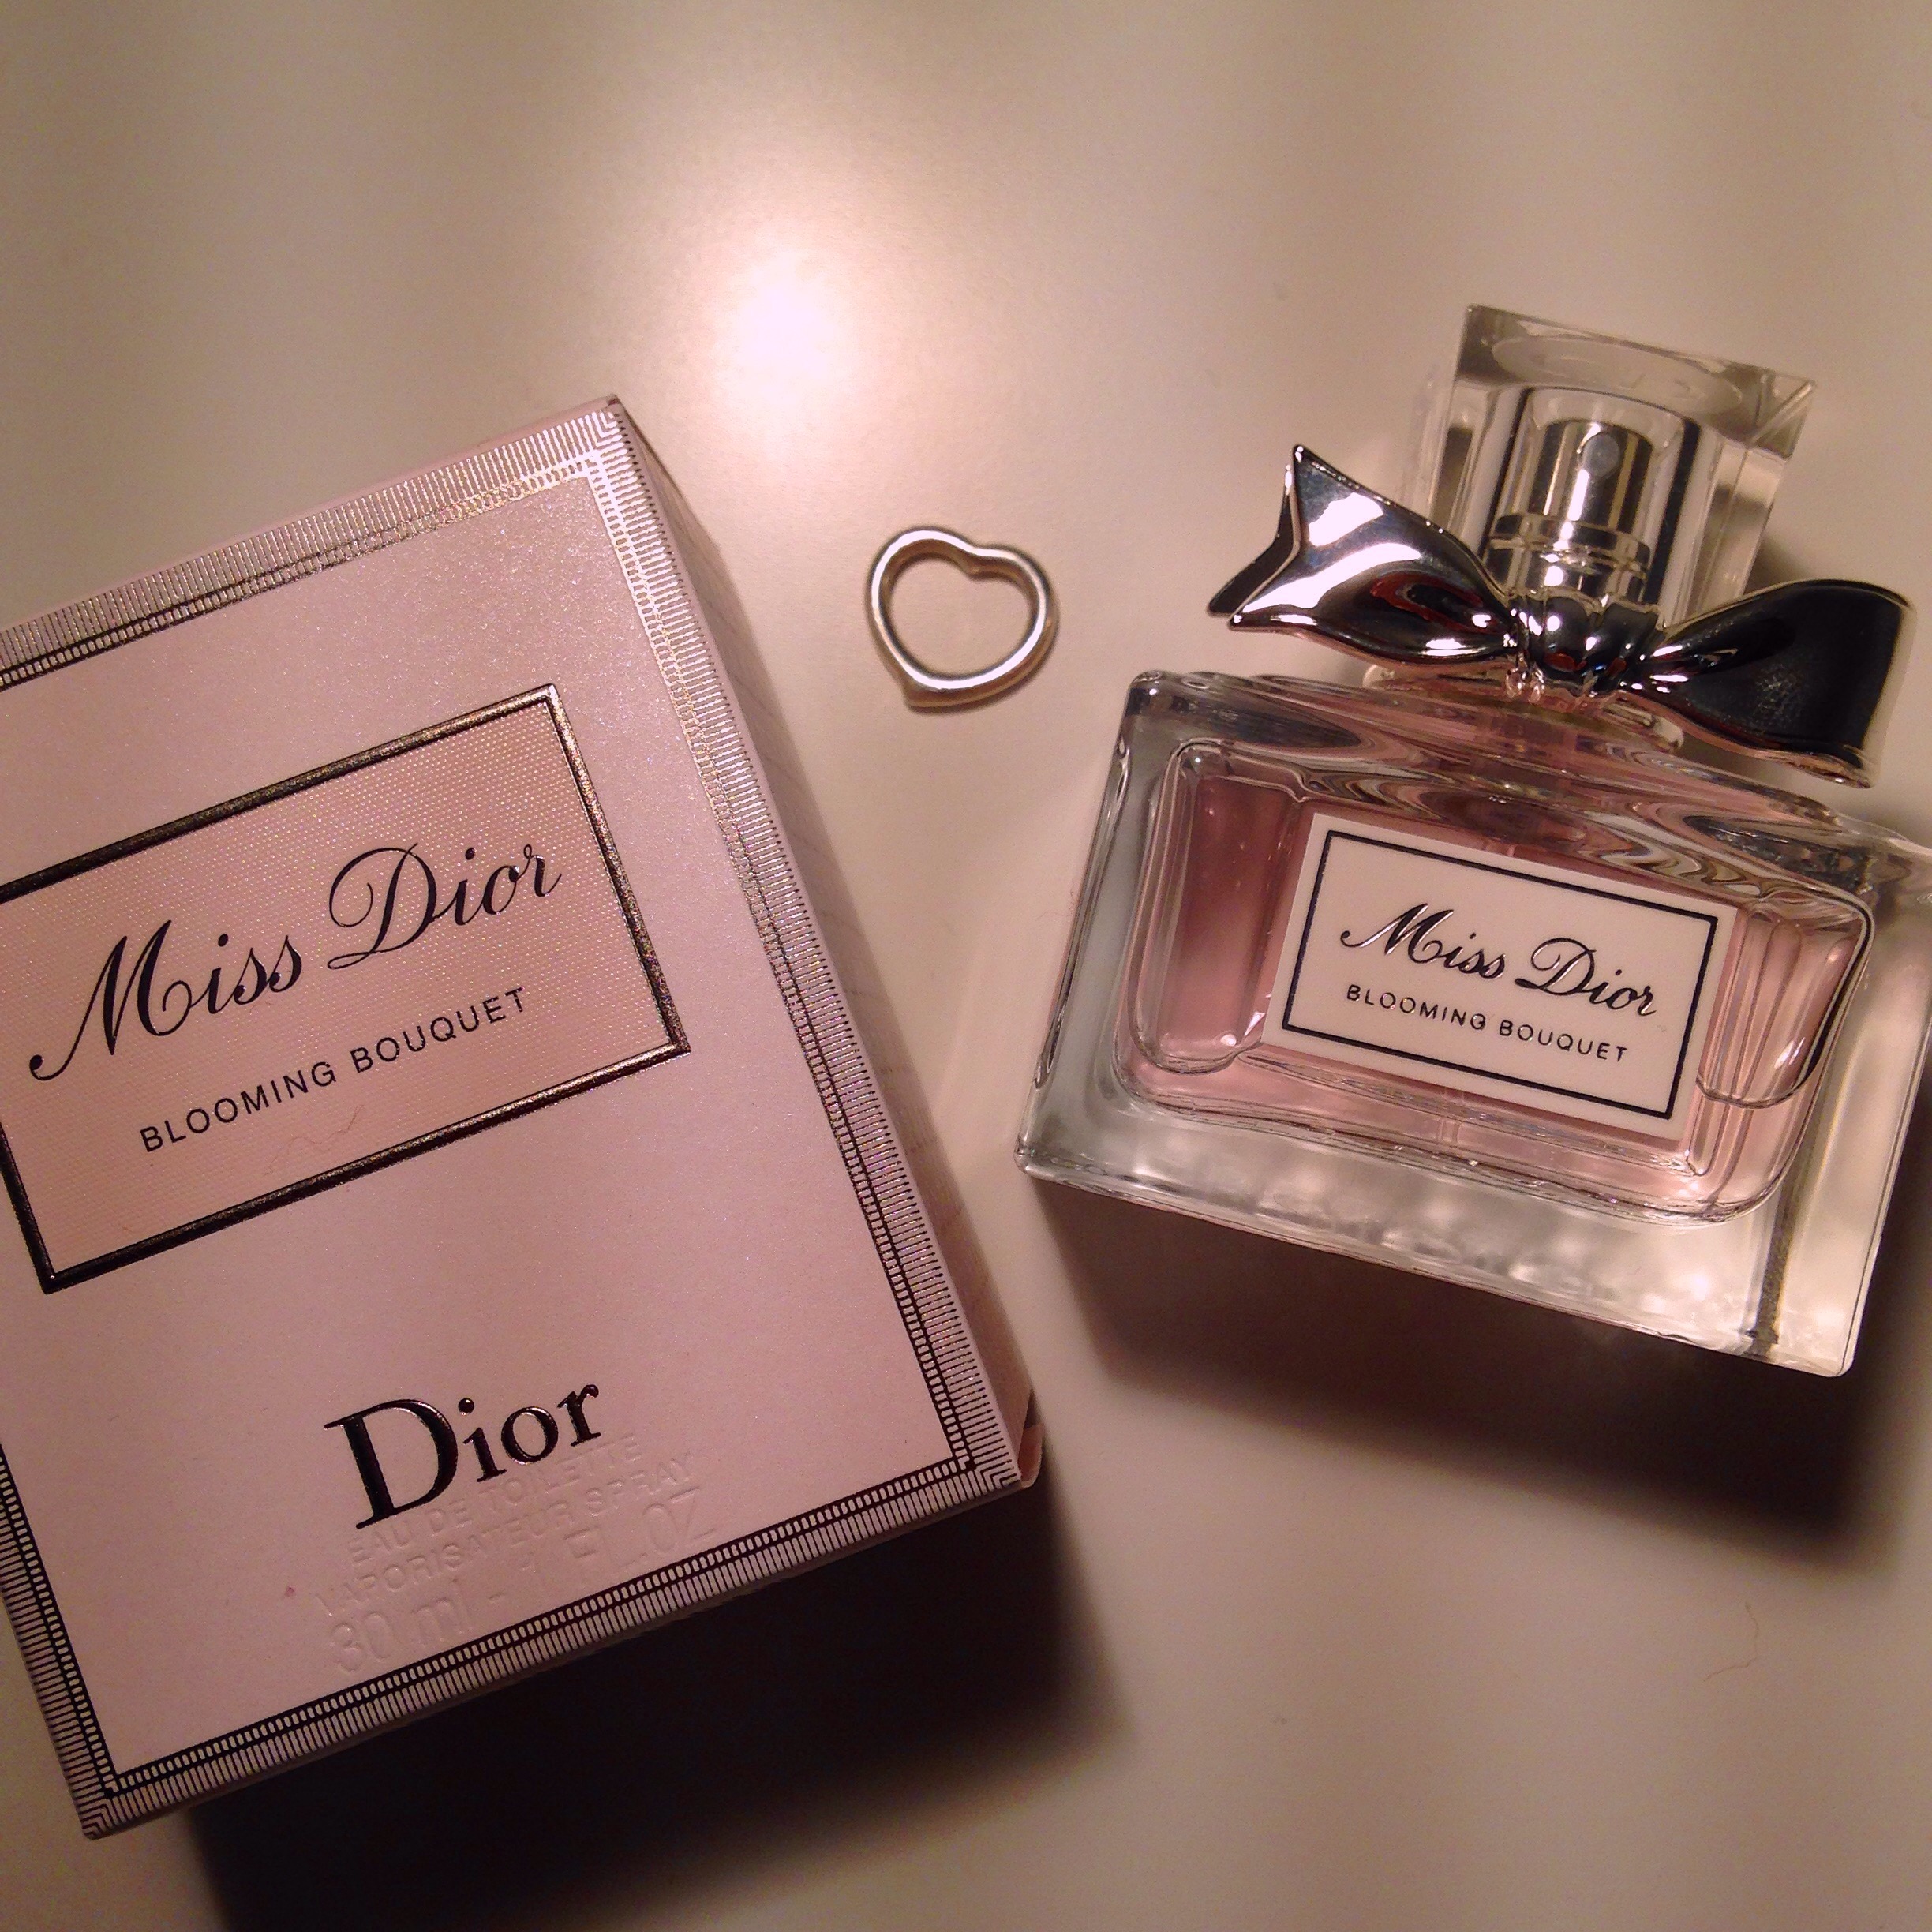 miss dior absolutely blooming bouquet